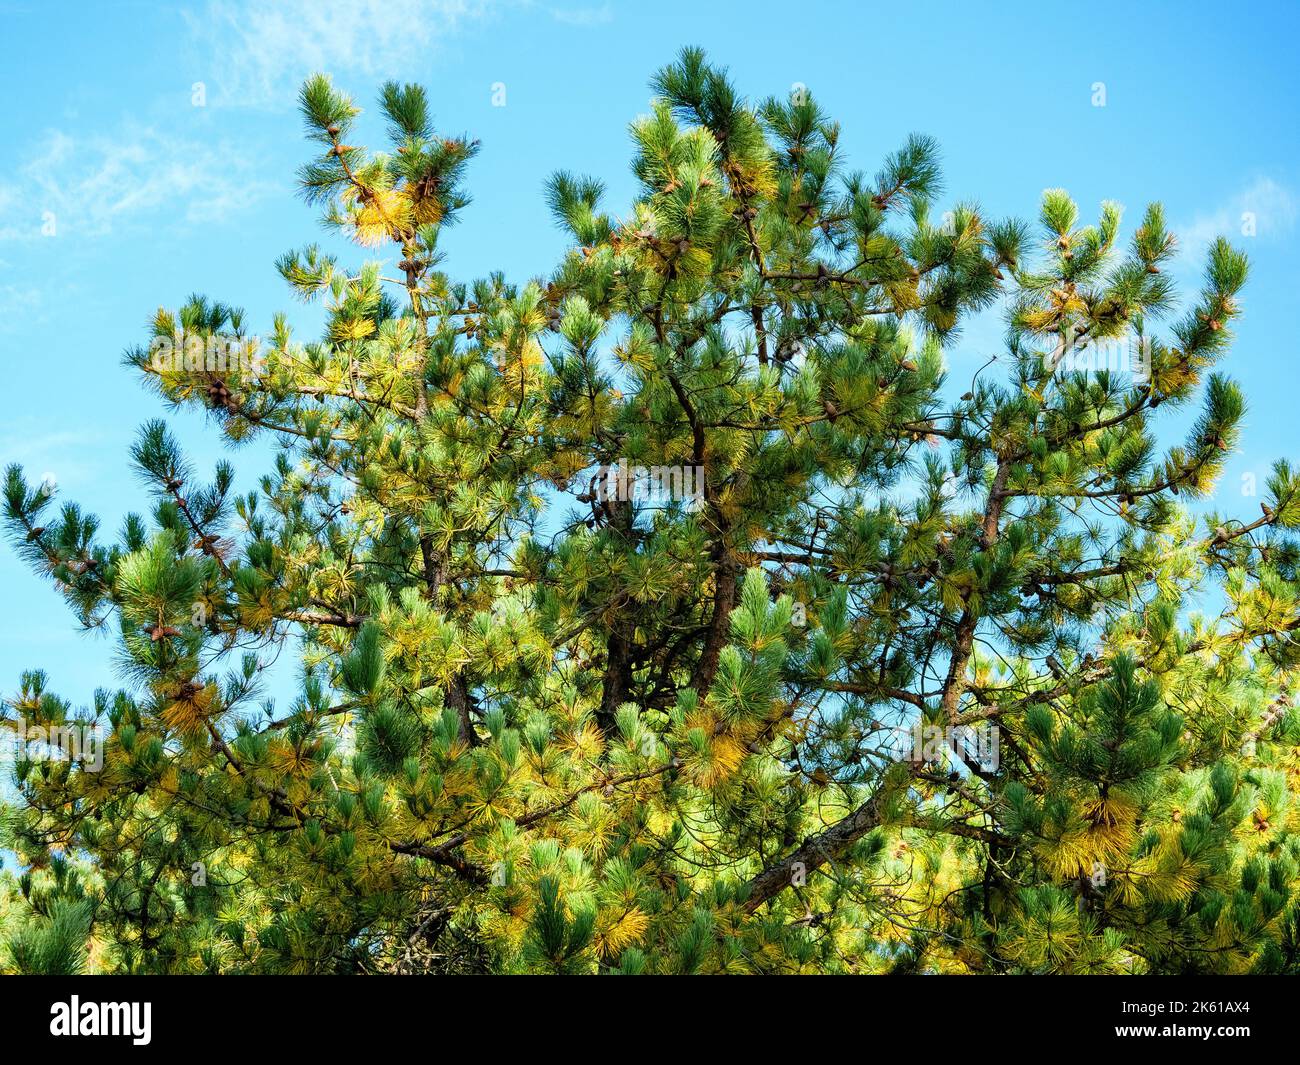 Amazing top of a pine tree with long needles on yellow-green branches Stock Photo